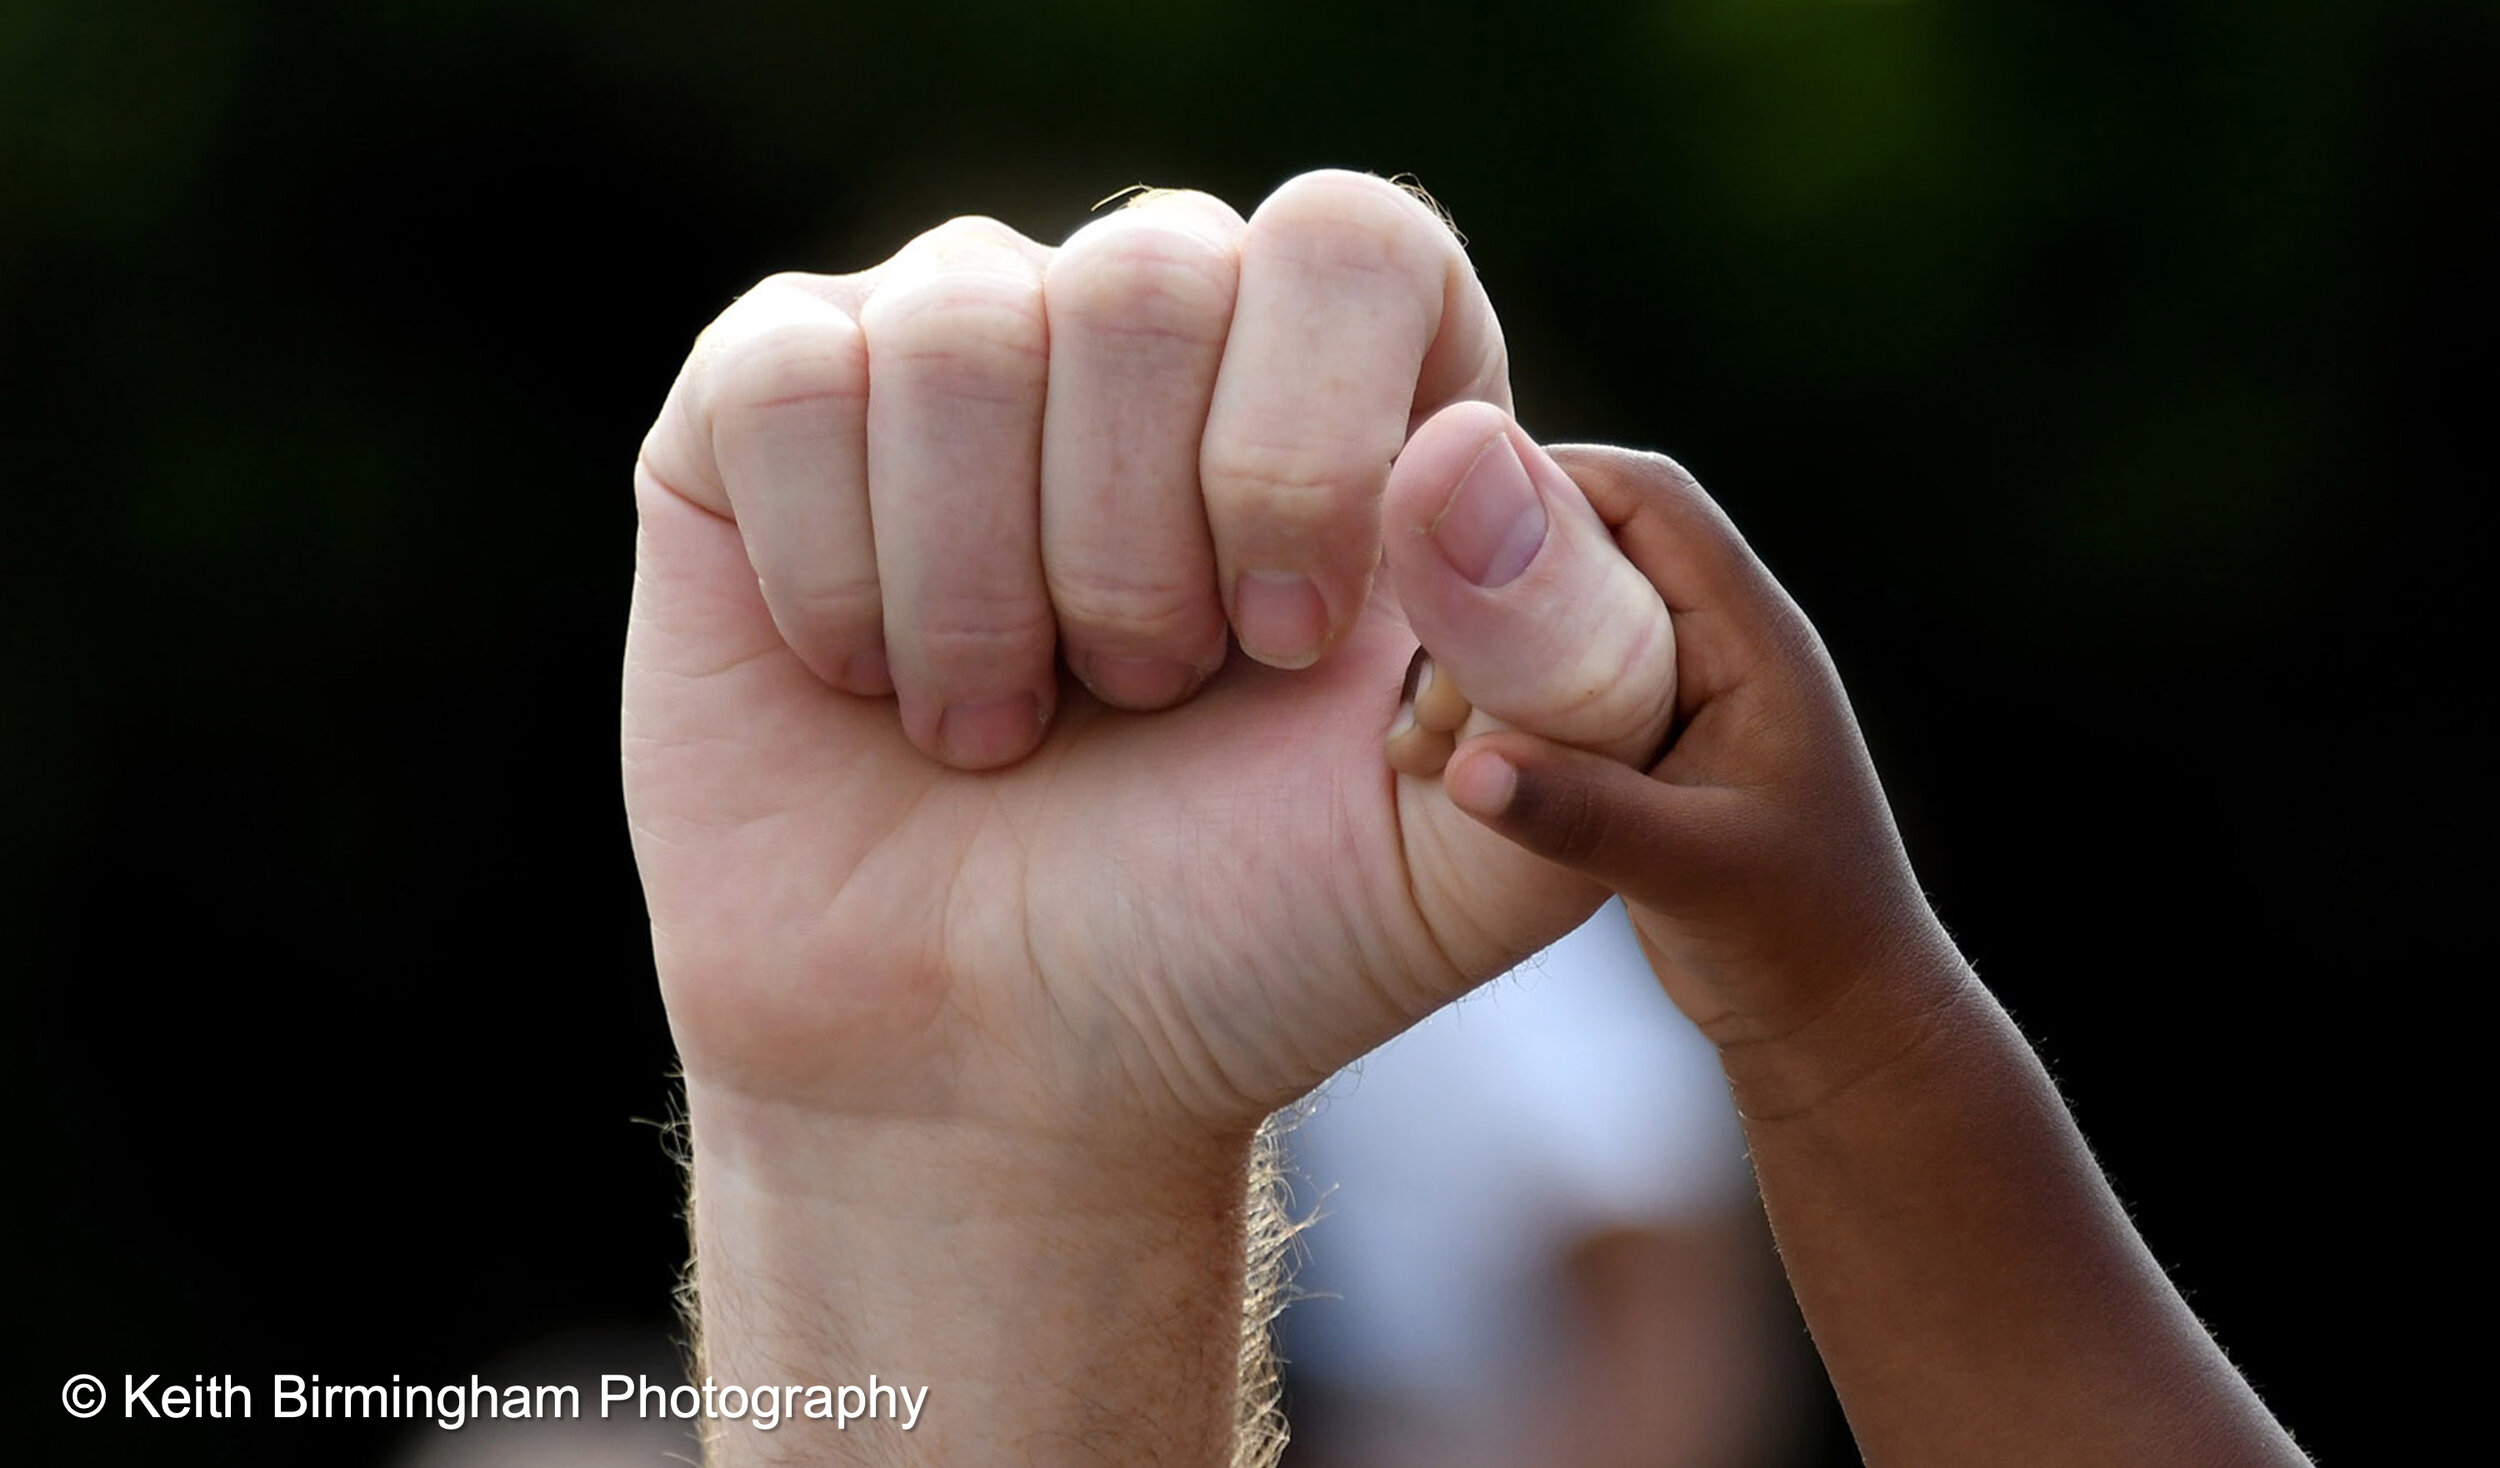  Eric Puestow of Pasadena with his 1 1/2 year-old daughter Simone holds his fist up as she holds onto his hand as thousands of demonstrators caravan to the Pasadena City Hall to protest and hold a vigil after the death of George Floyd, a black man wh